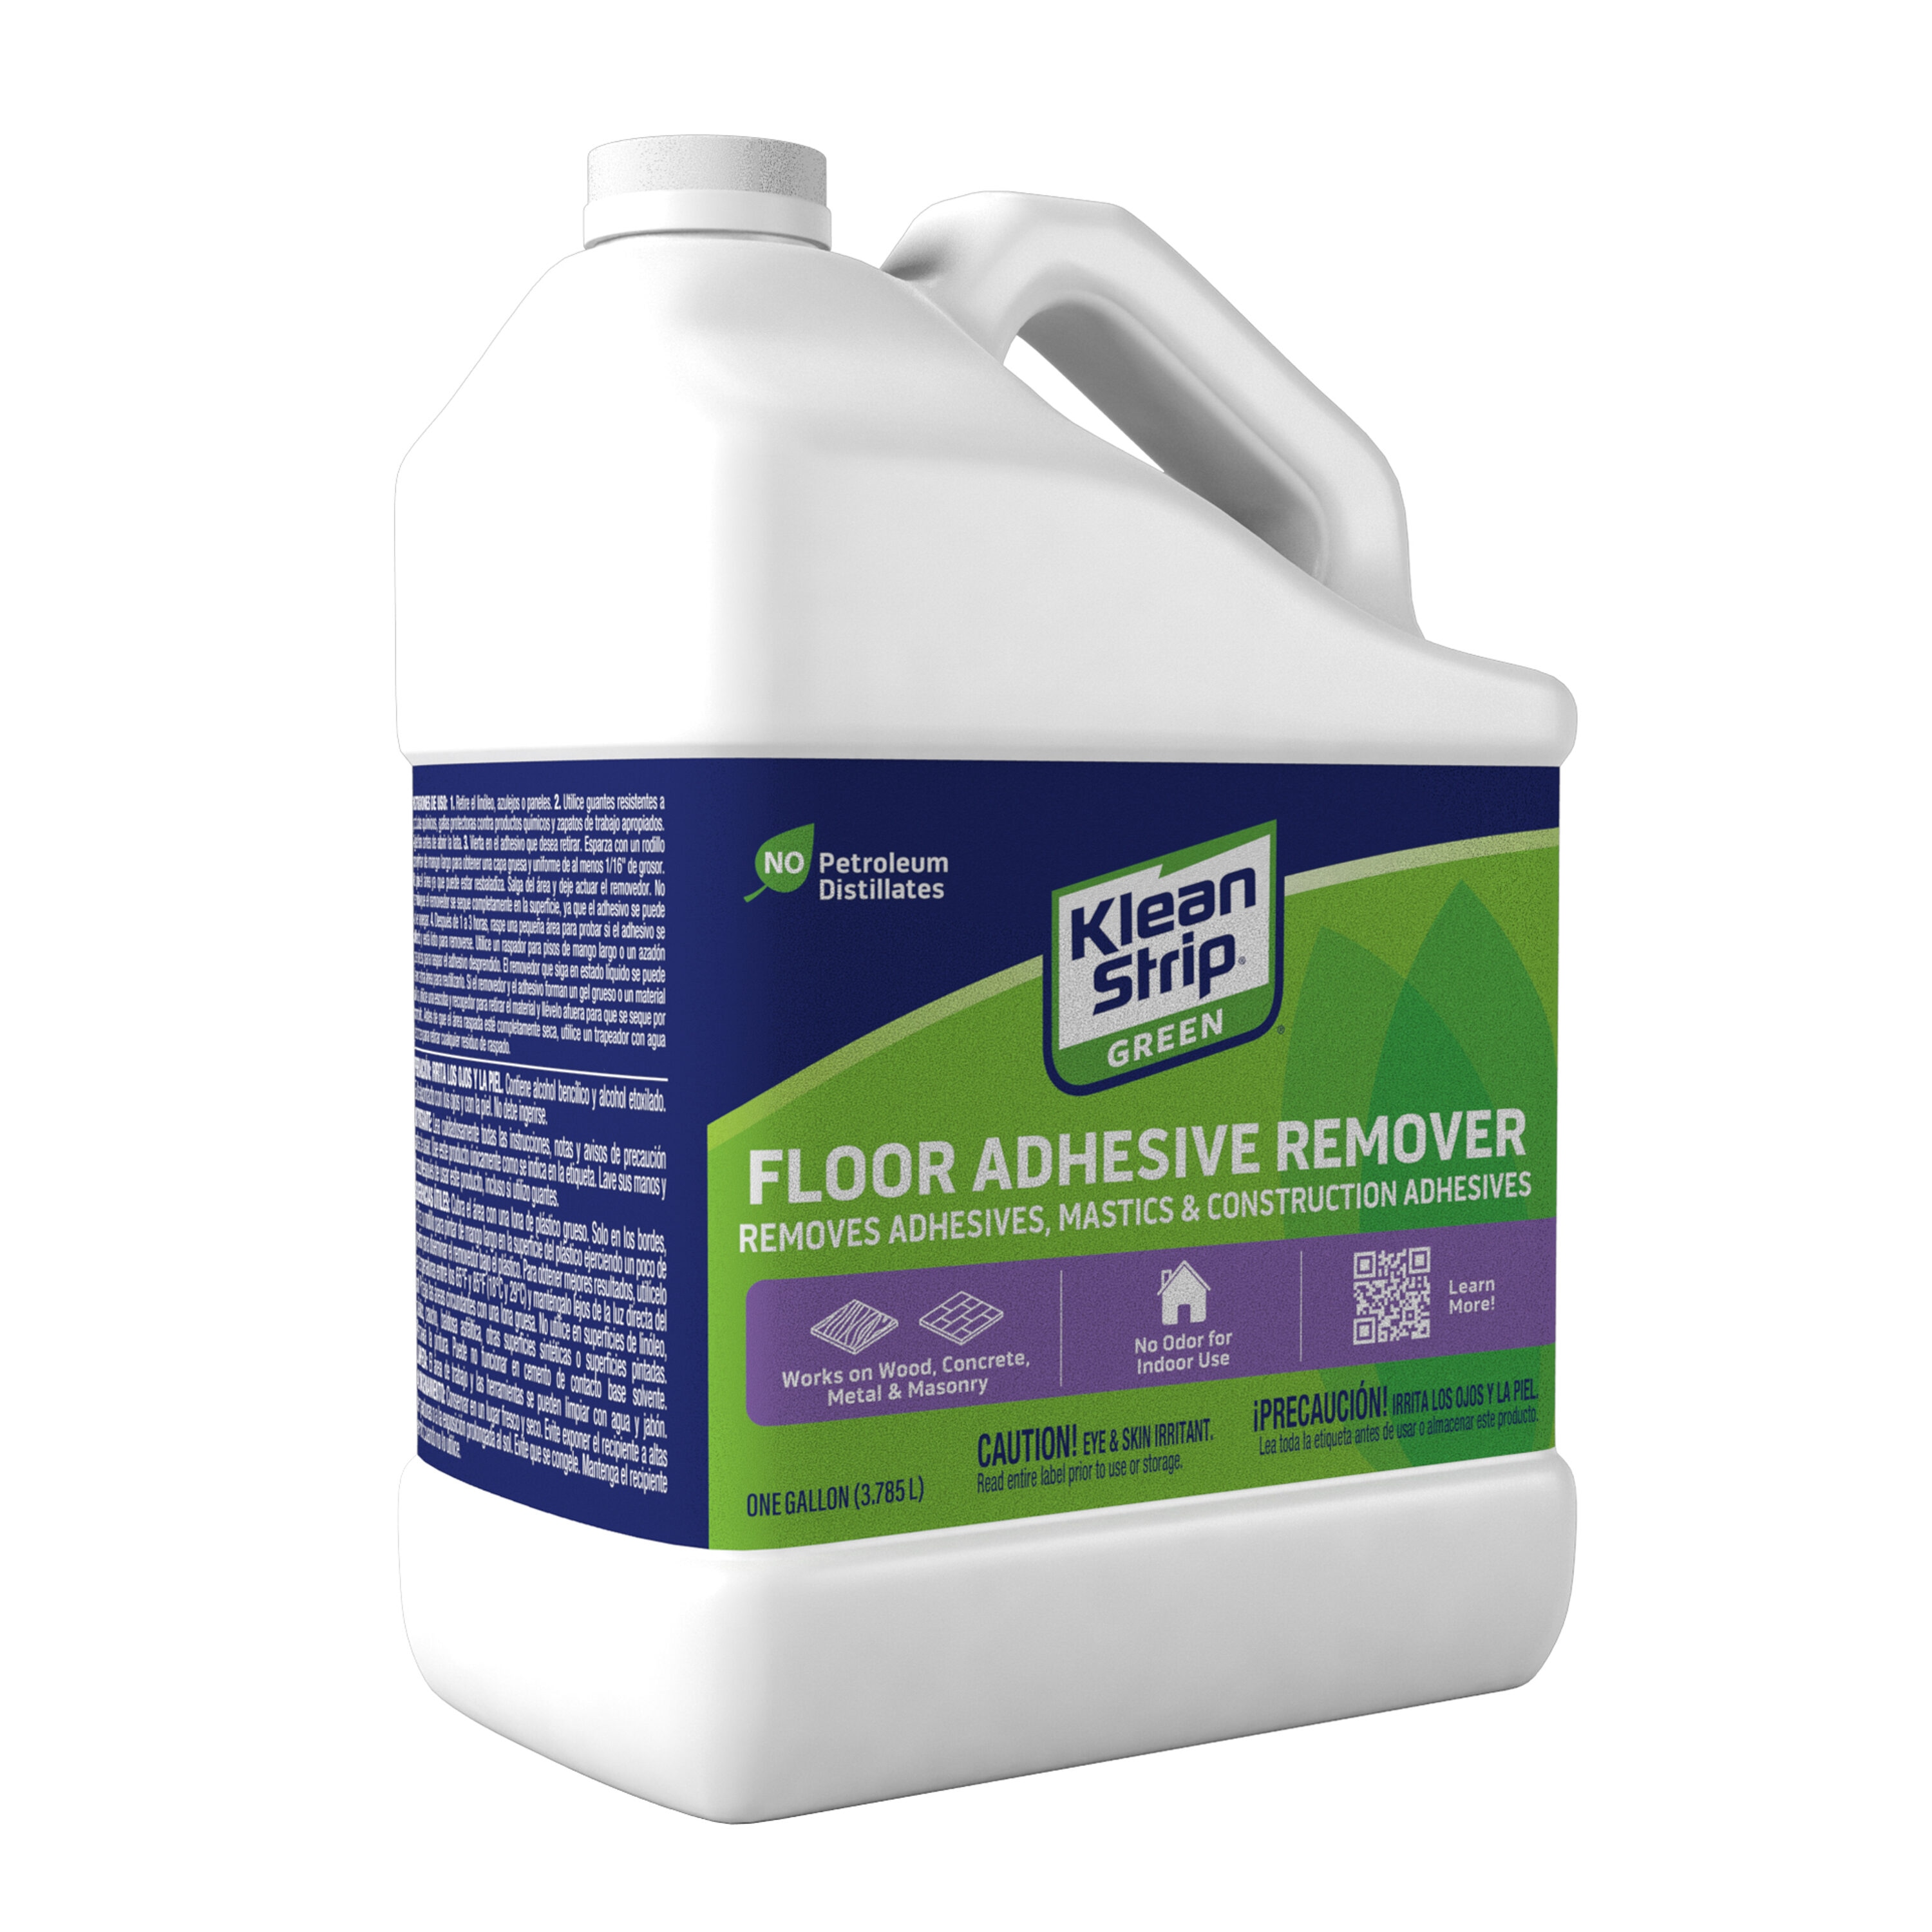 Klean-Strip Green 1 Gal. Floor Adhesive Remover GKGF75015 - The Home Depot